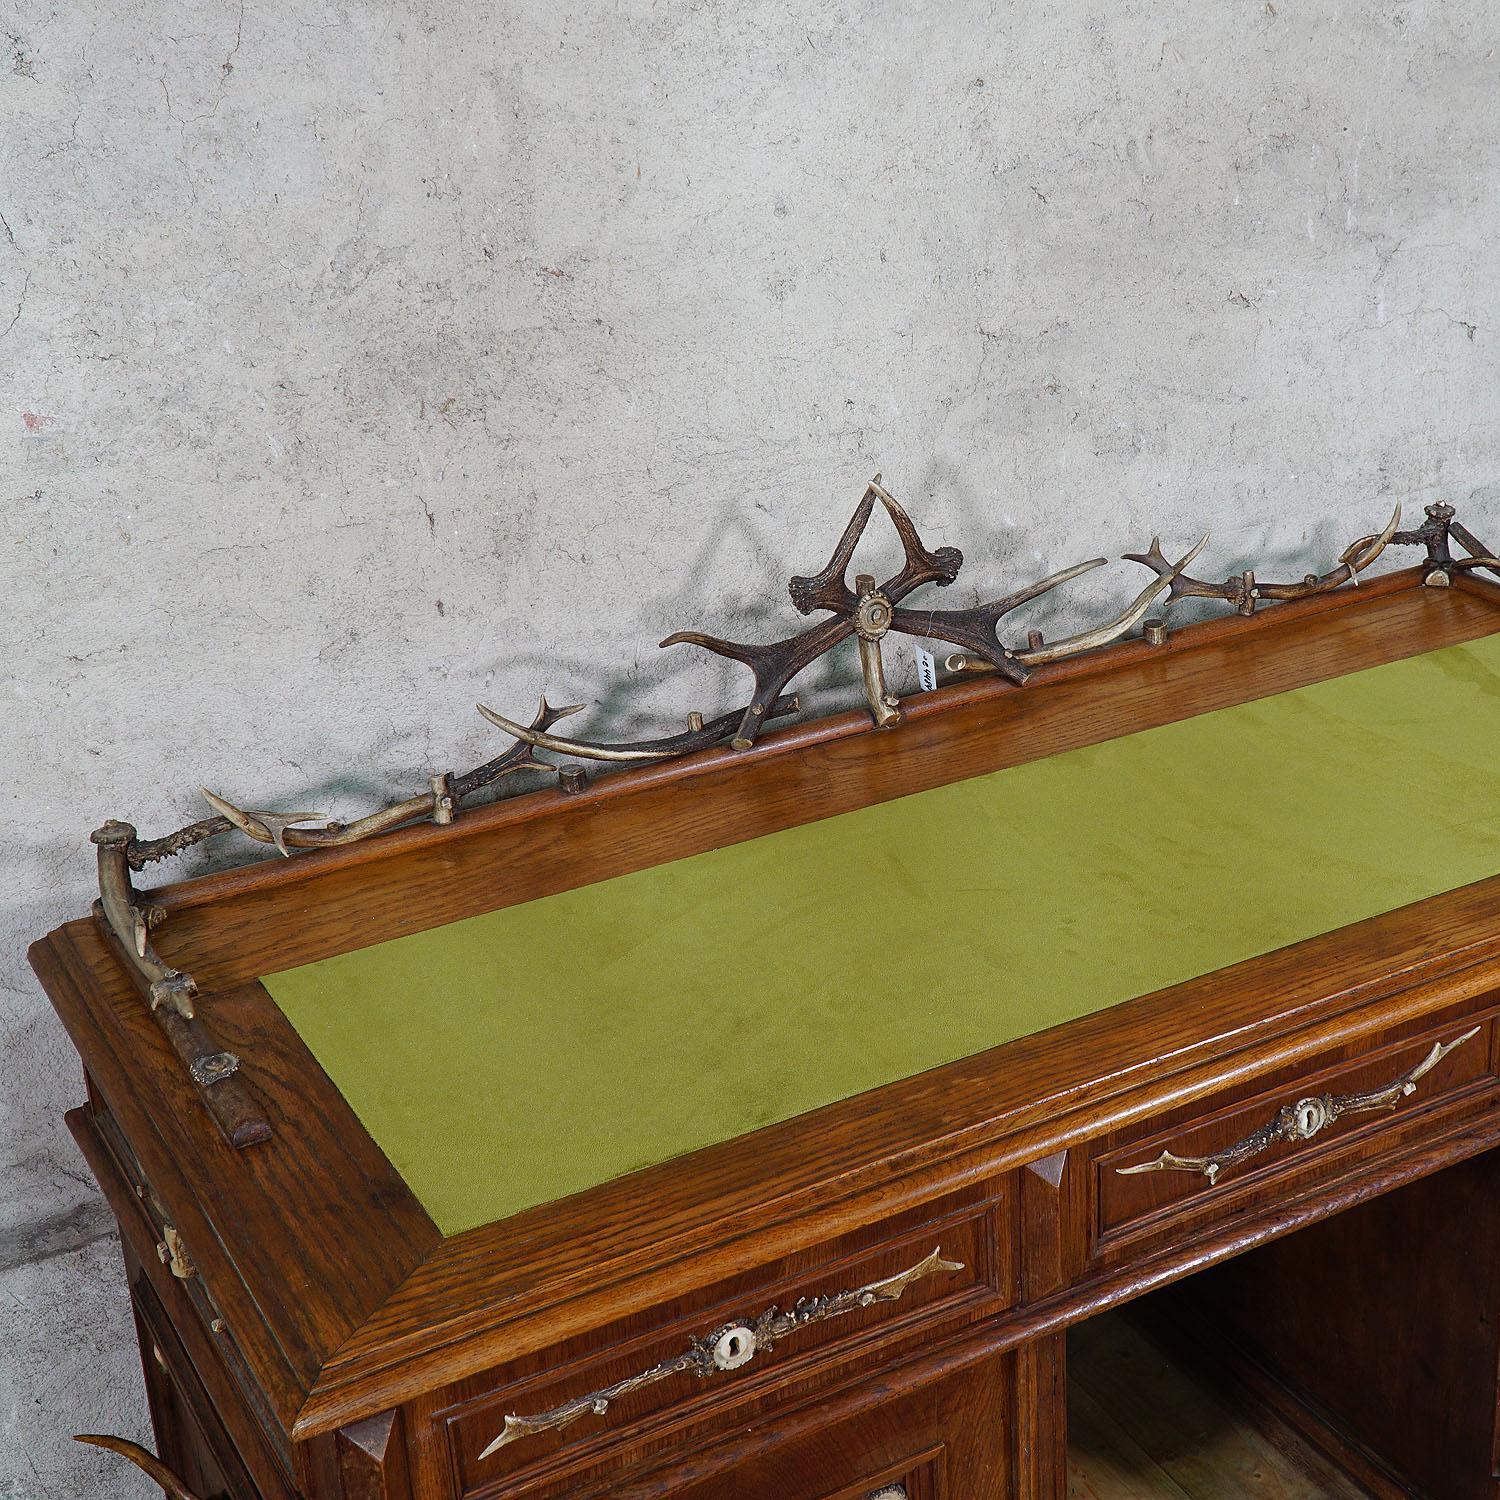 19th Century Large Oak Wood Desk with Antler Decorations by Rudolf Brix 1900 For Sale